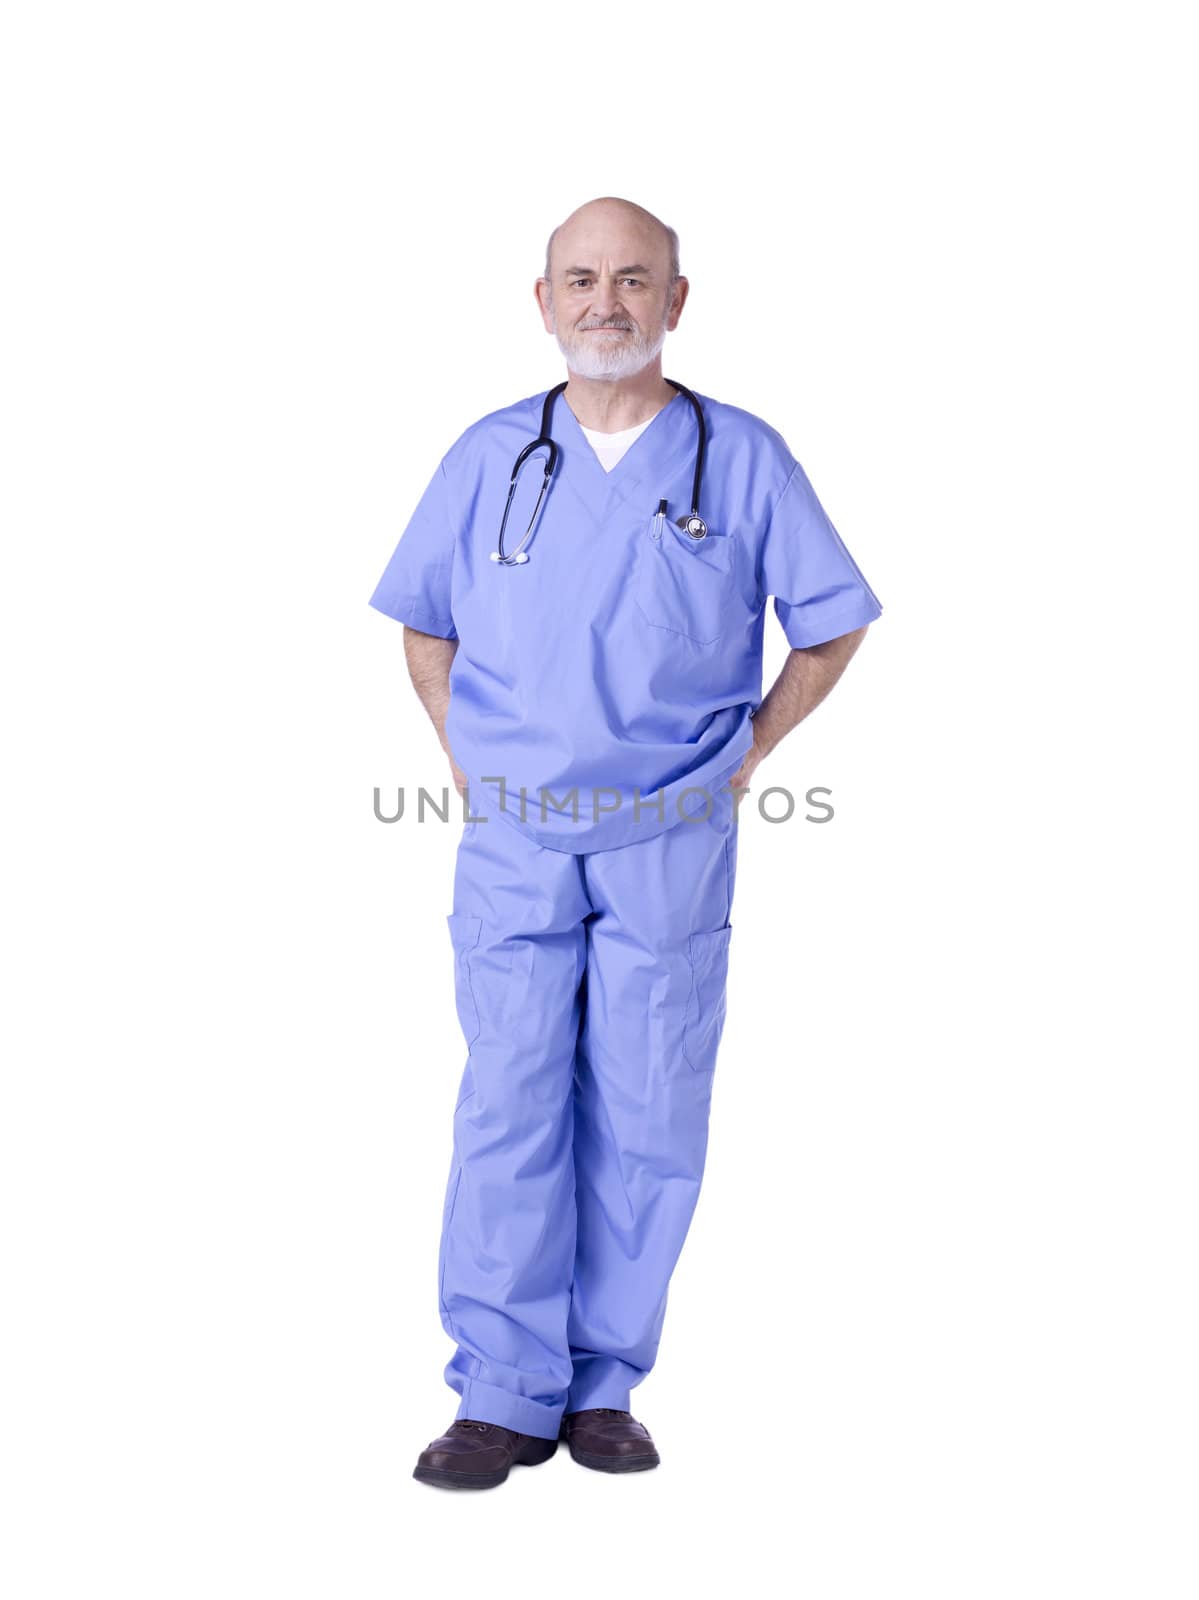 Portrait image of a male nurse looking at camera against white background